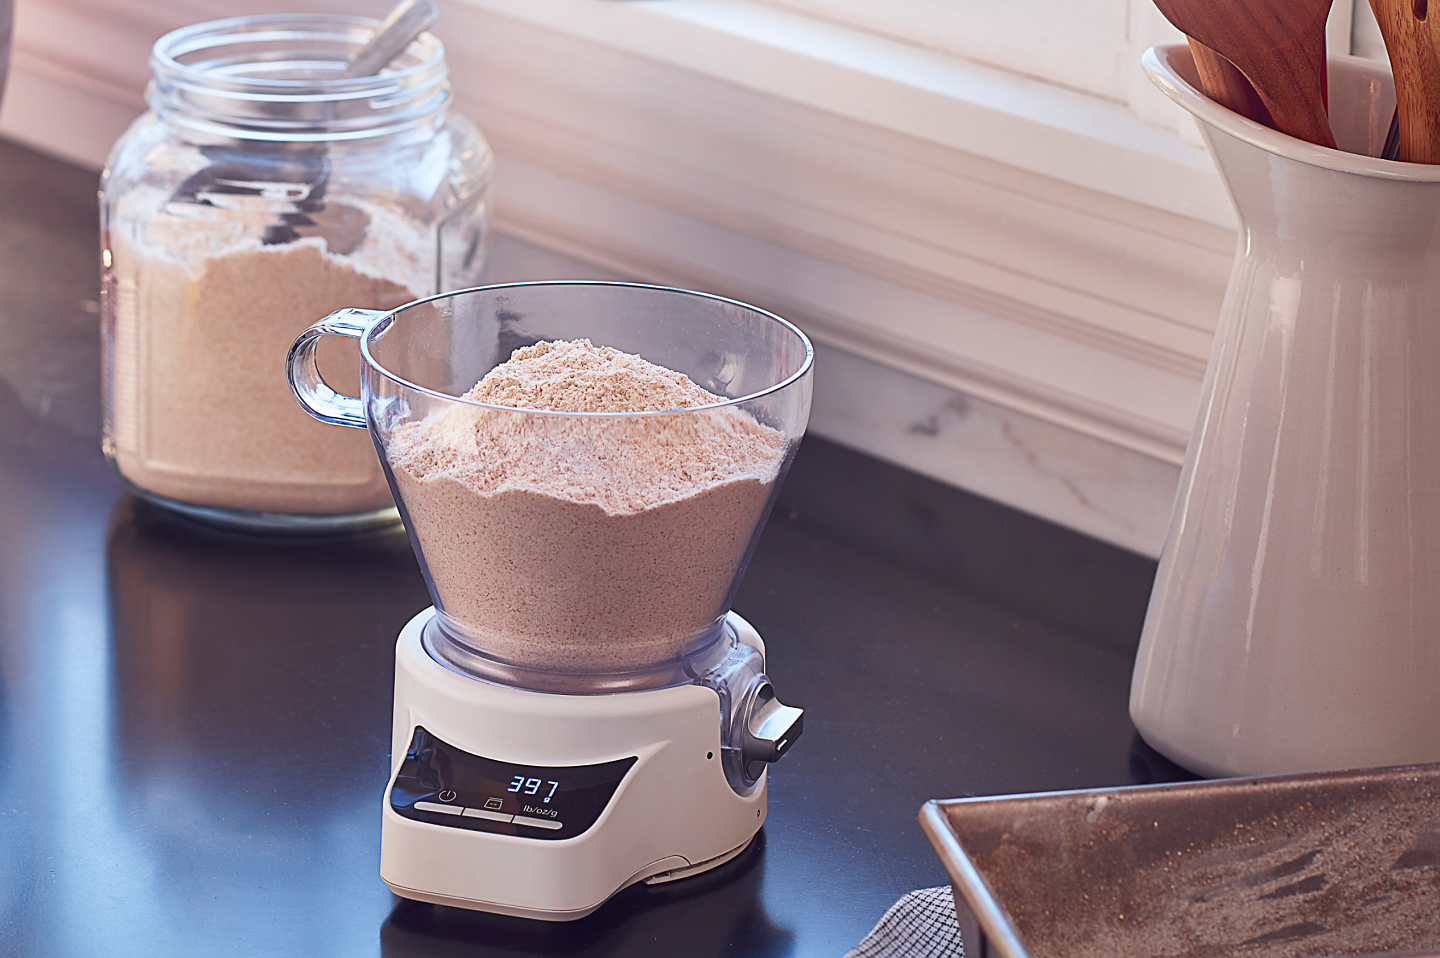 KitchenAid® Sifter + Scale Attachment sitting on countertop full of flour